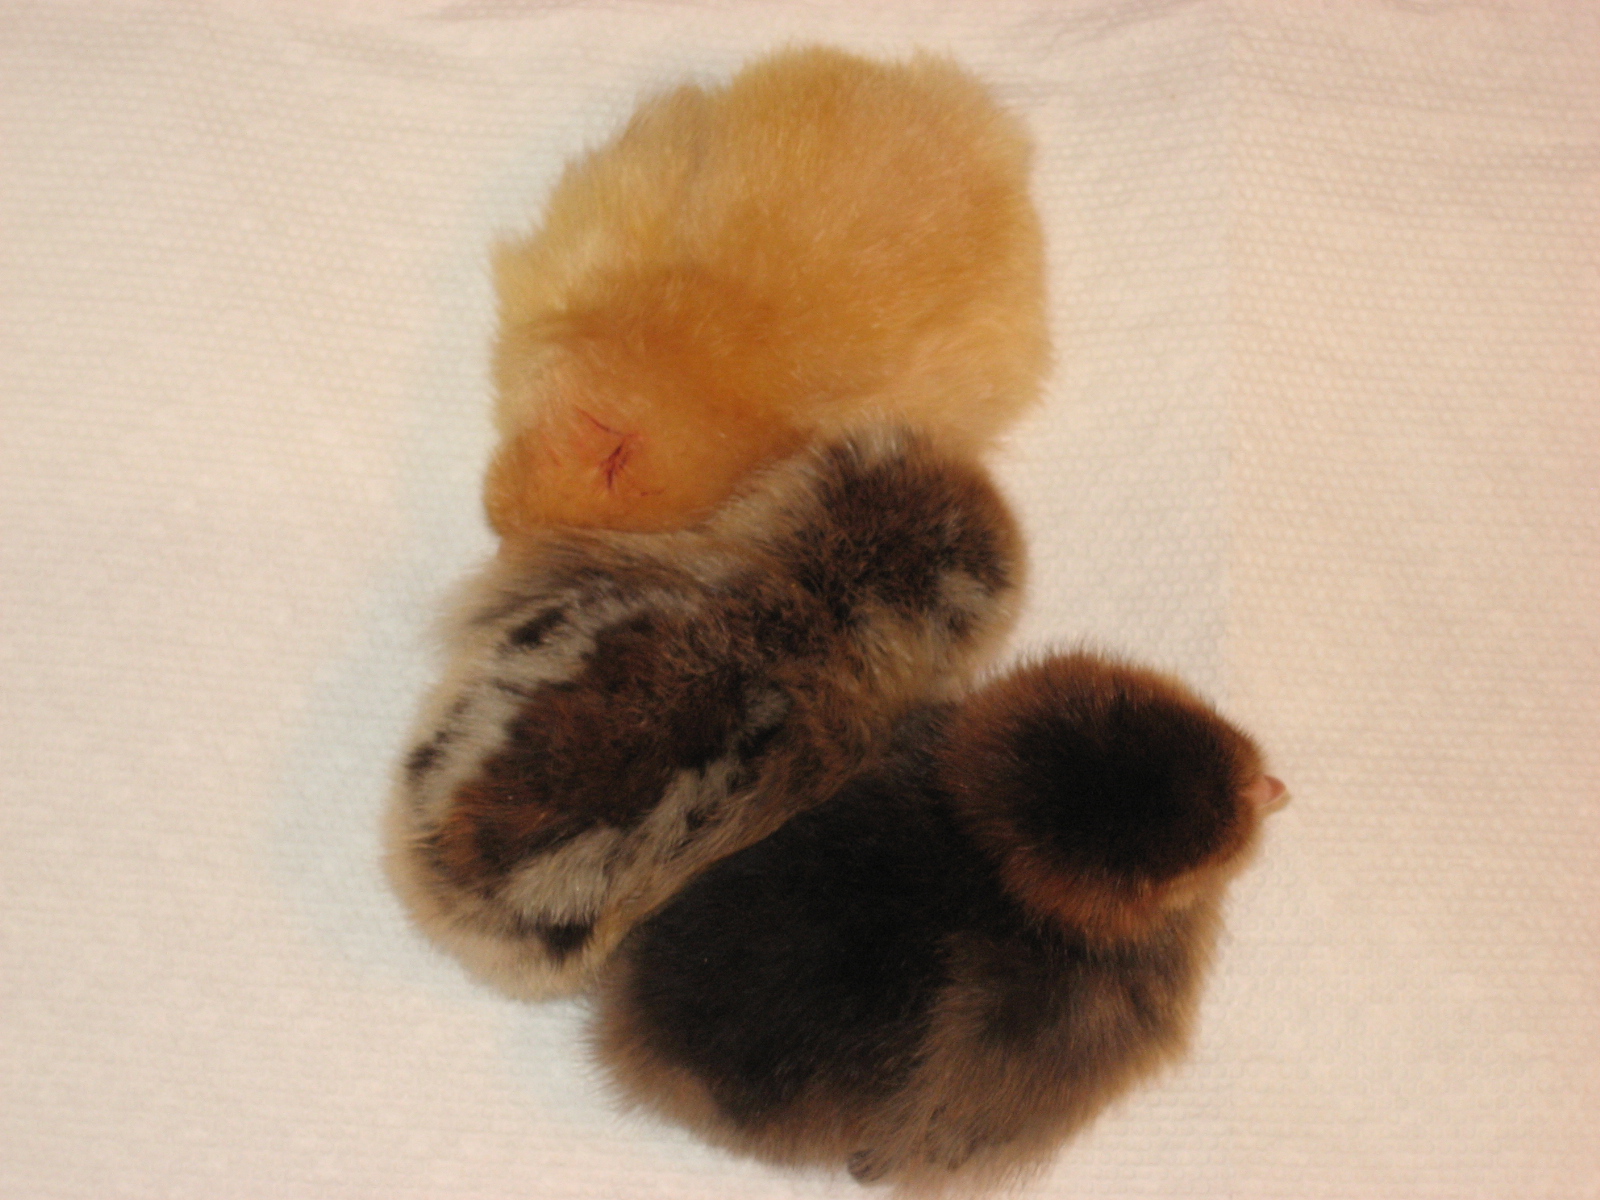 3 new chicks from WFS picked up on 7/12/12